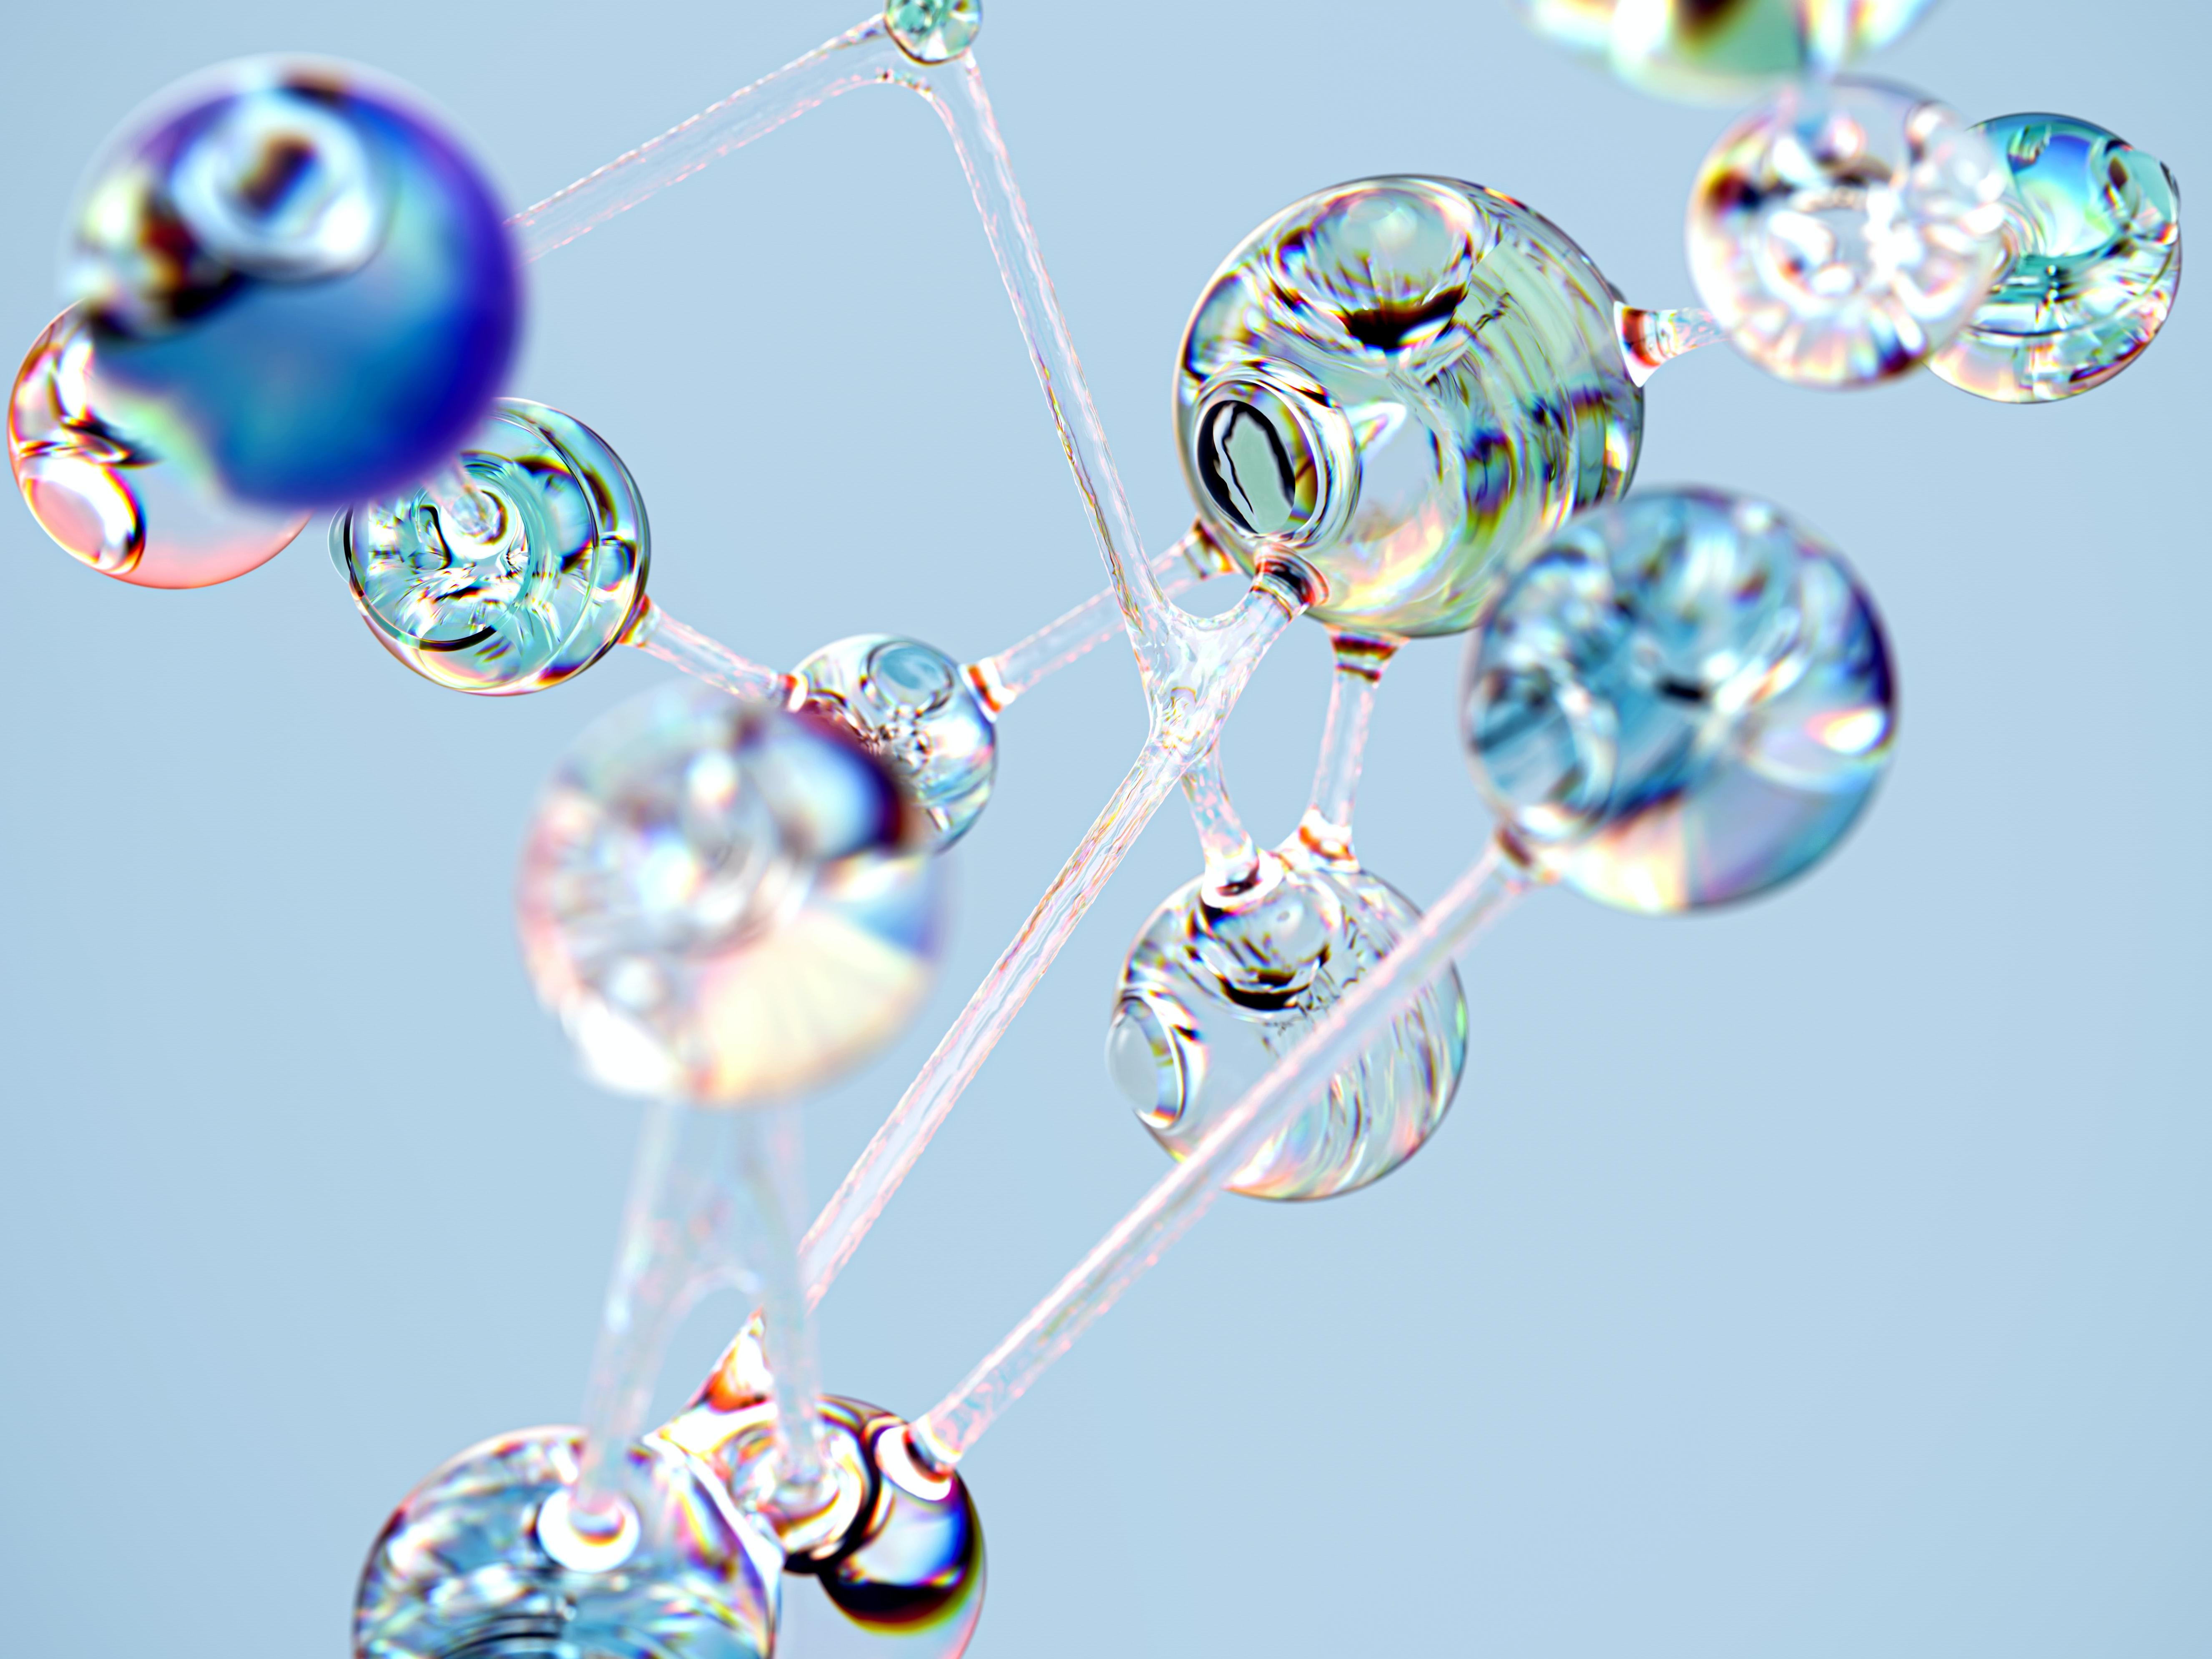 Decorative image: delicate balls of coloured glass connected together.